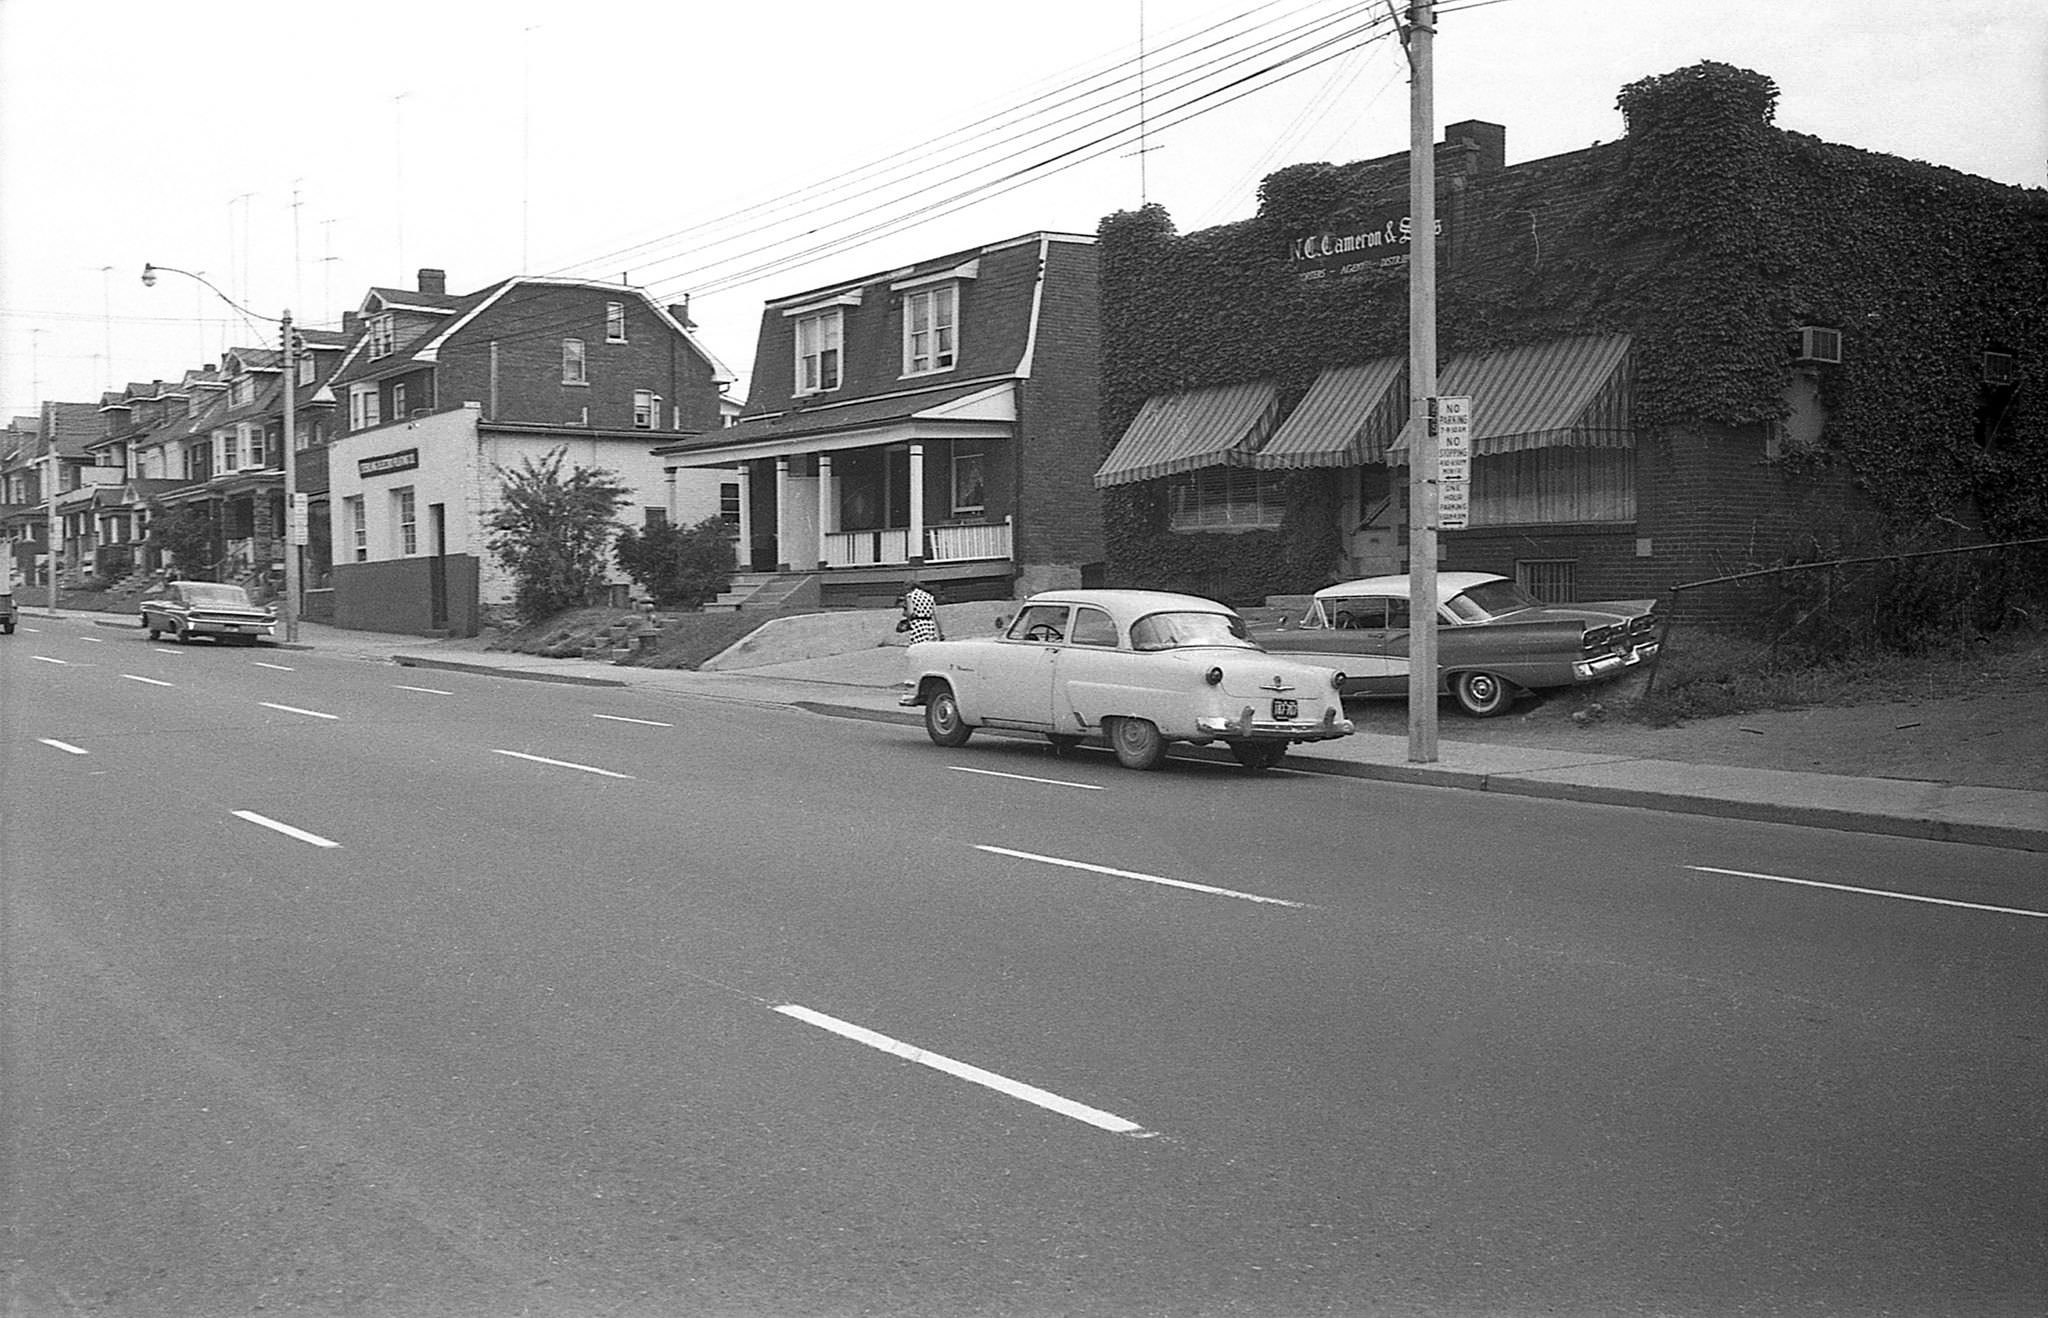 N C Cameron & Sons, (Importers) 919 Dufferin St., 1960s. This is on the NE corner of Dufferin and Dufferin Park Ave. Now an apartment building. Houses to the north still stand.